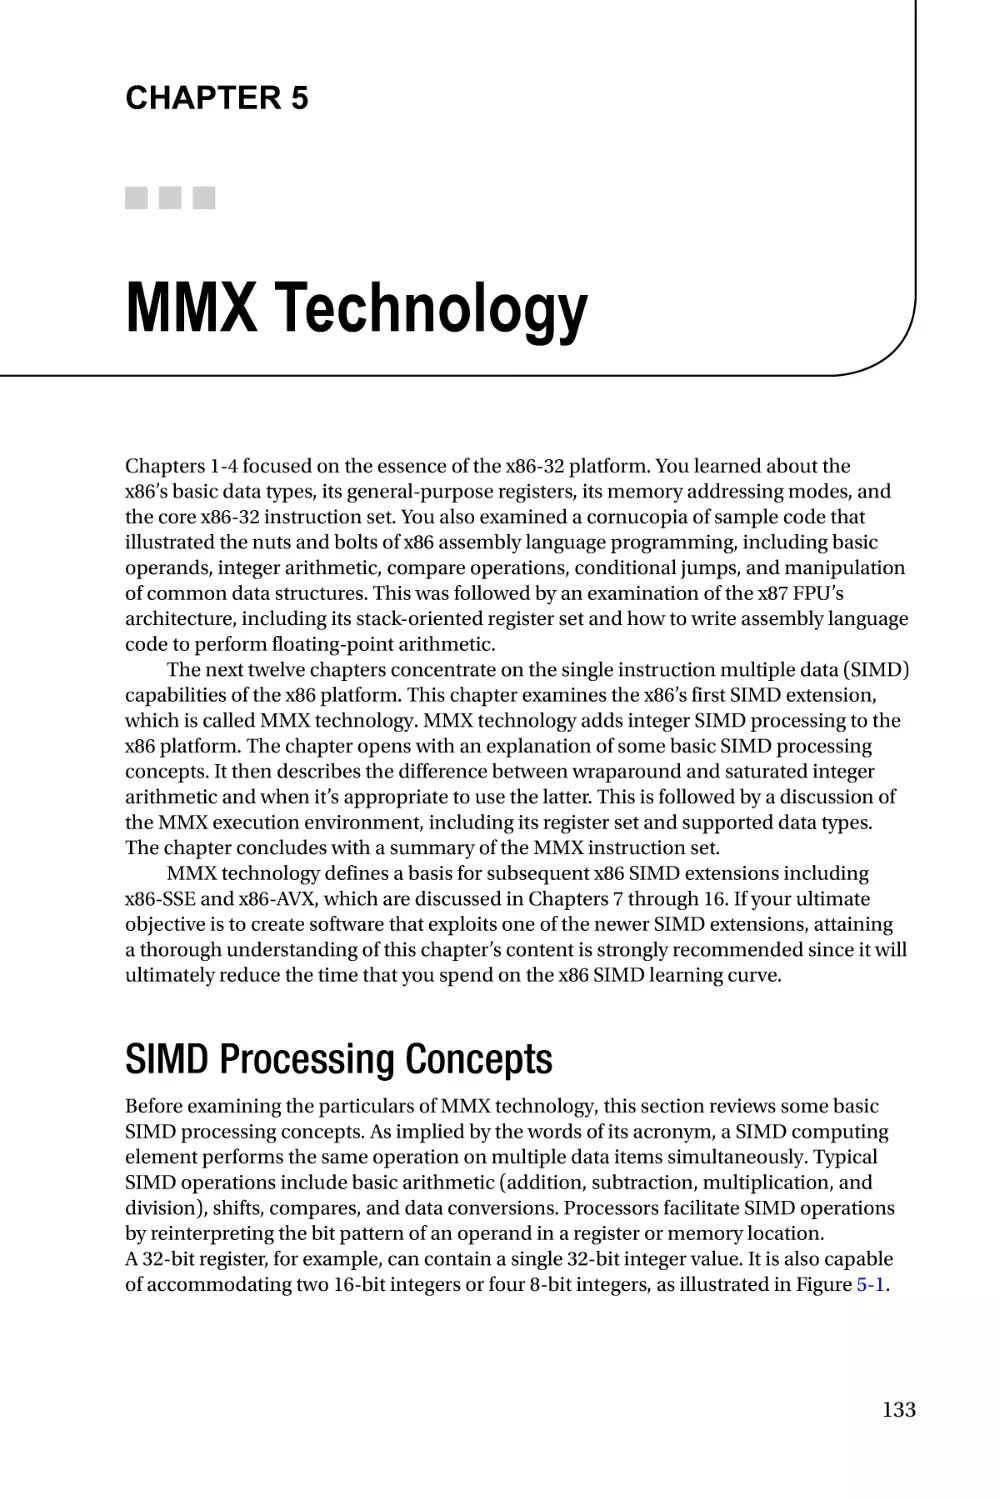 Chapter 5
SIMD Processing Concepts